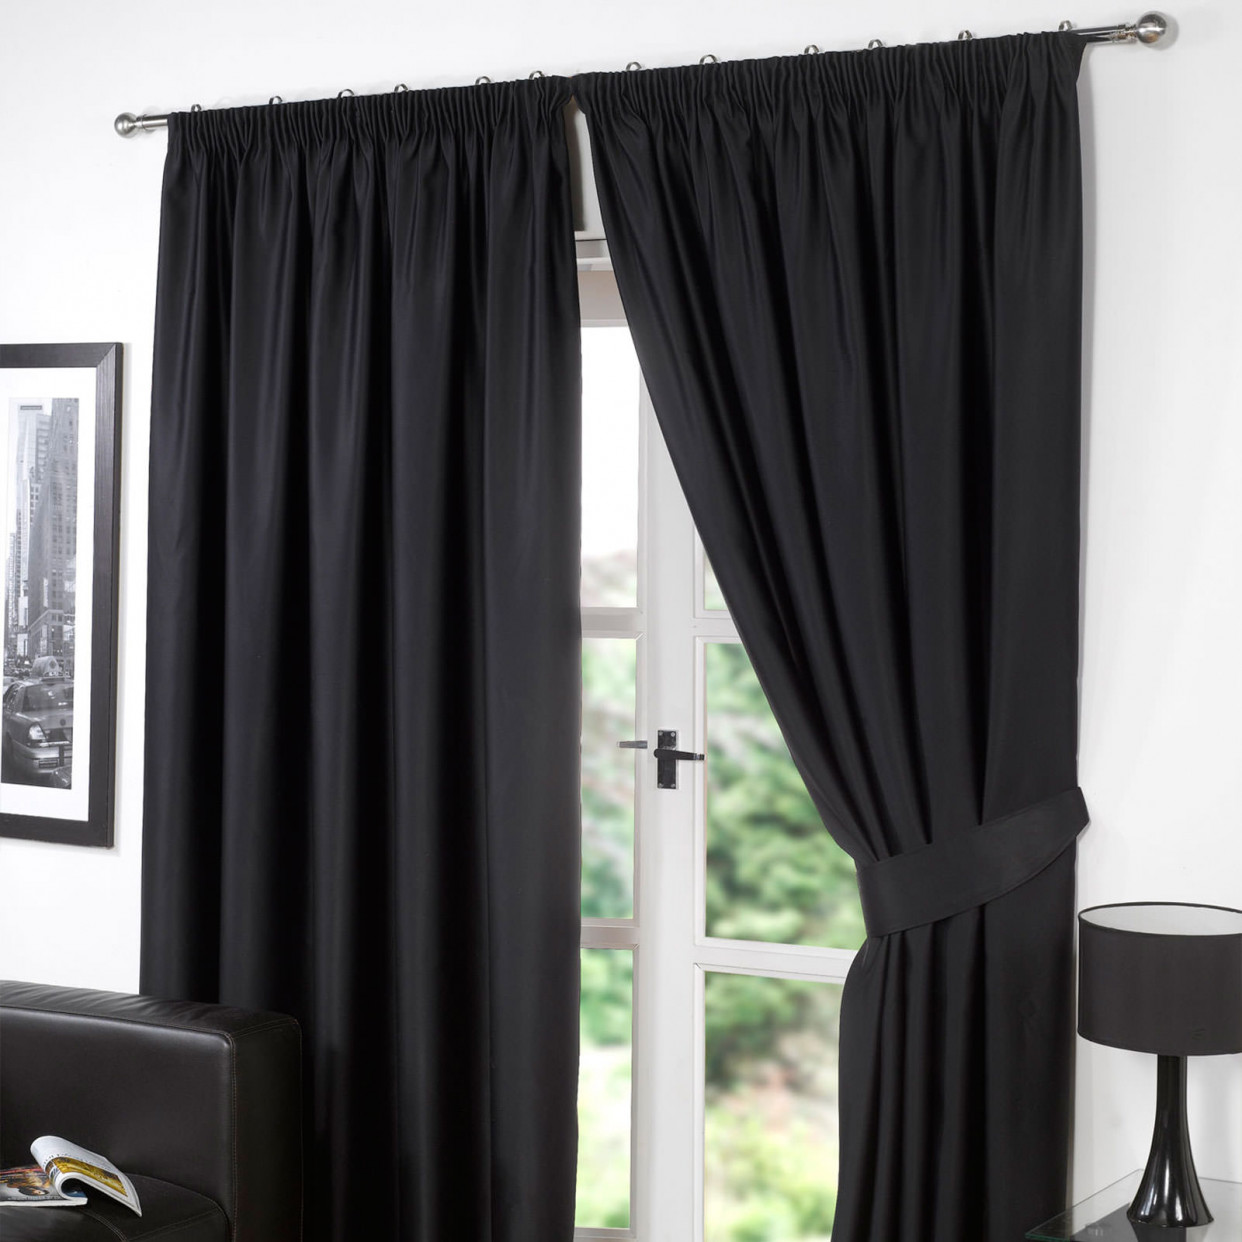 Pencil Pleat Thermal Blackout Fully Lined Curtains - Black 46x54>